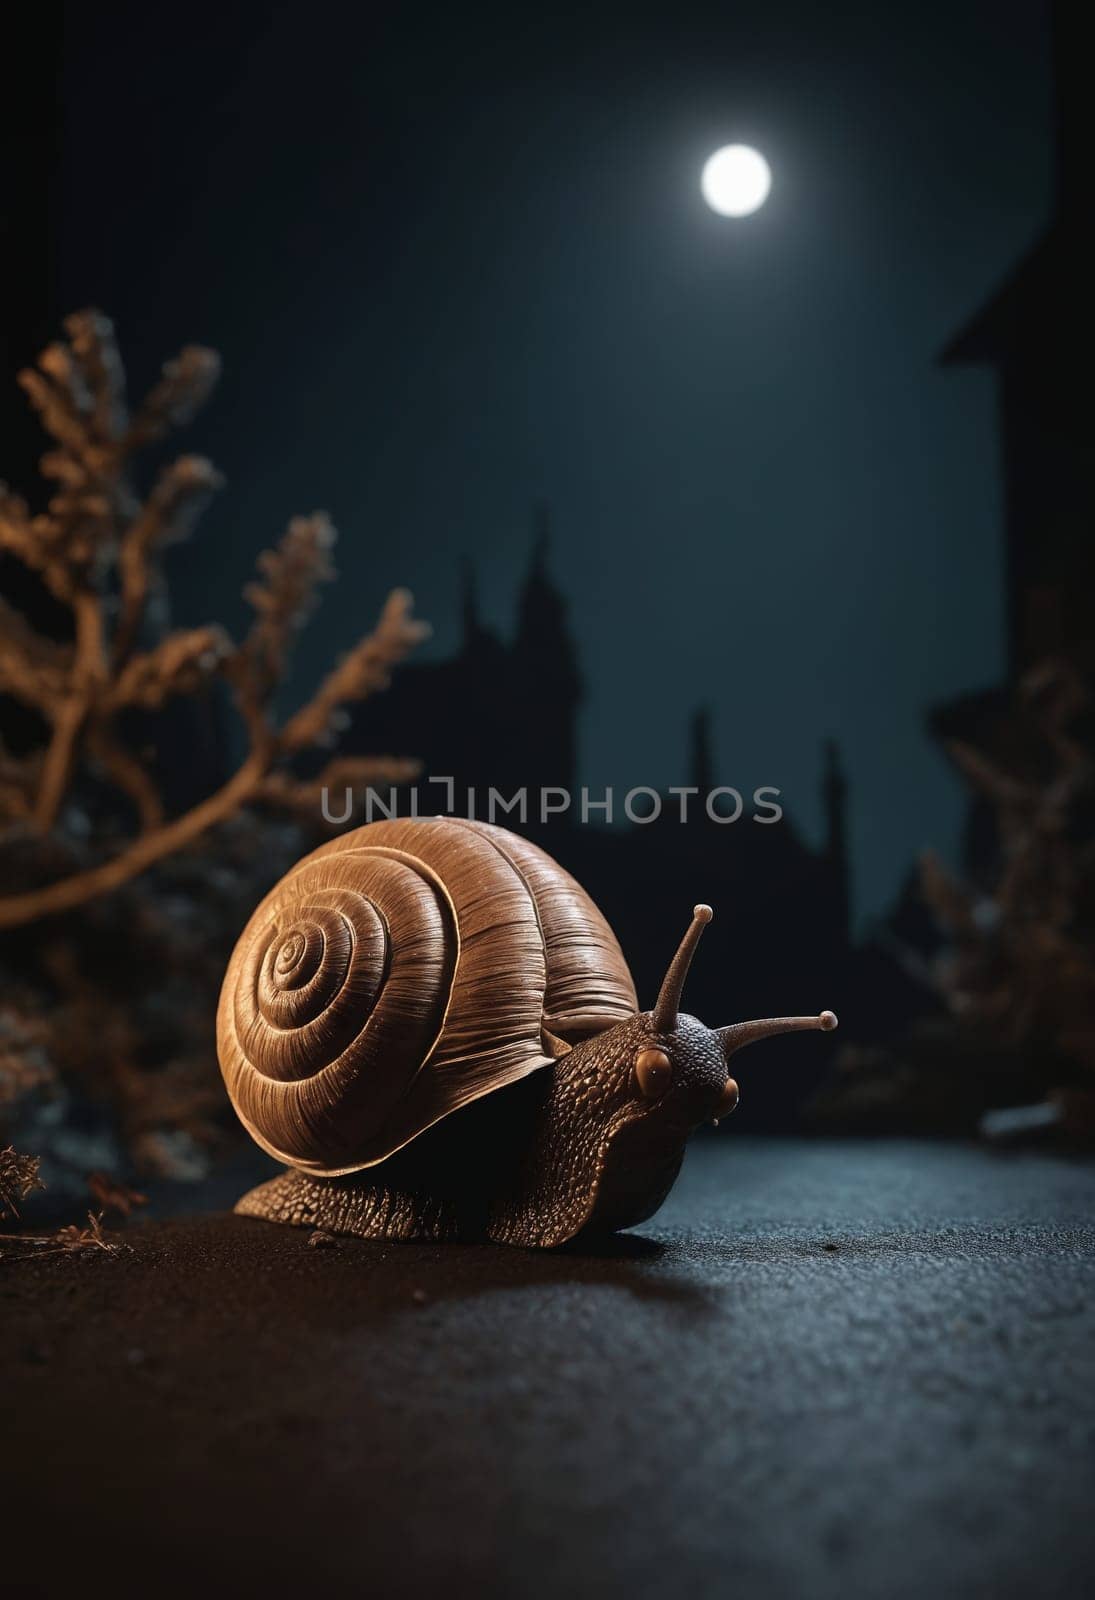 A snail moves slowly in the dark, its shell shining in monochrome photography by Andre1ns